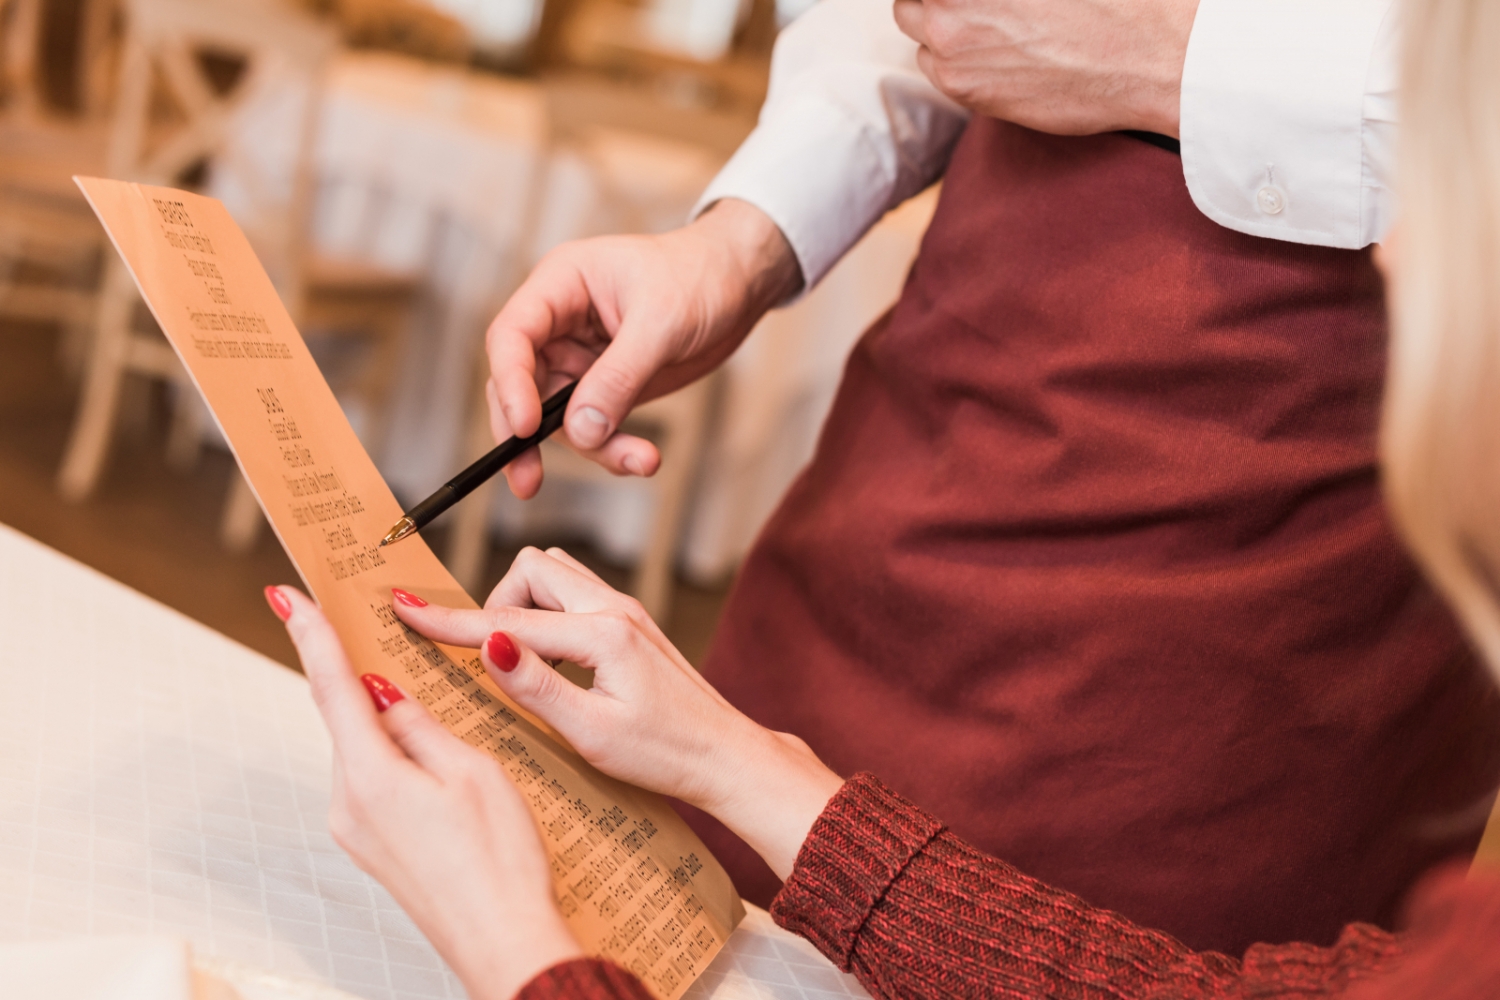 30 Things that will Make Restaurant Servers Love You